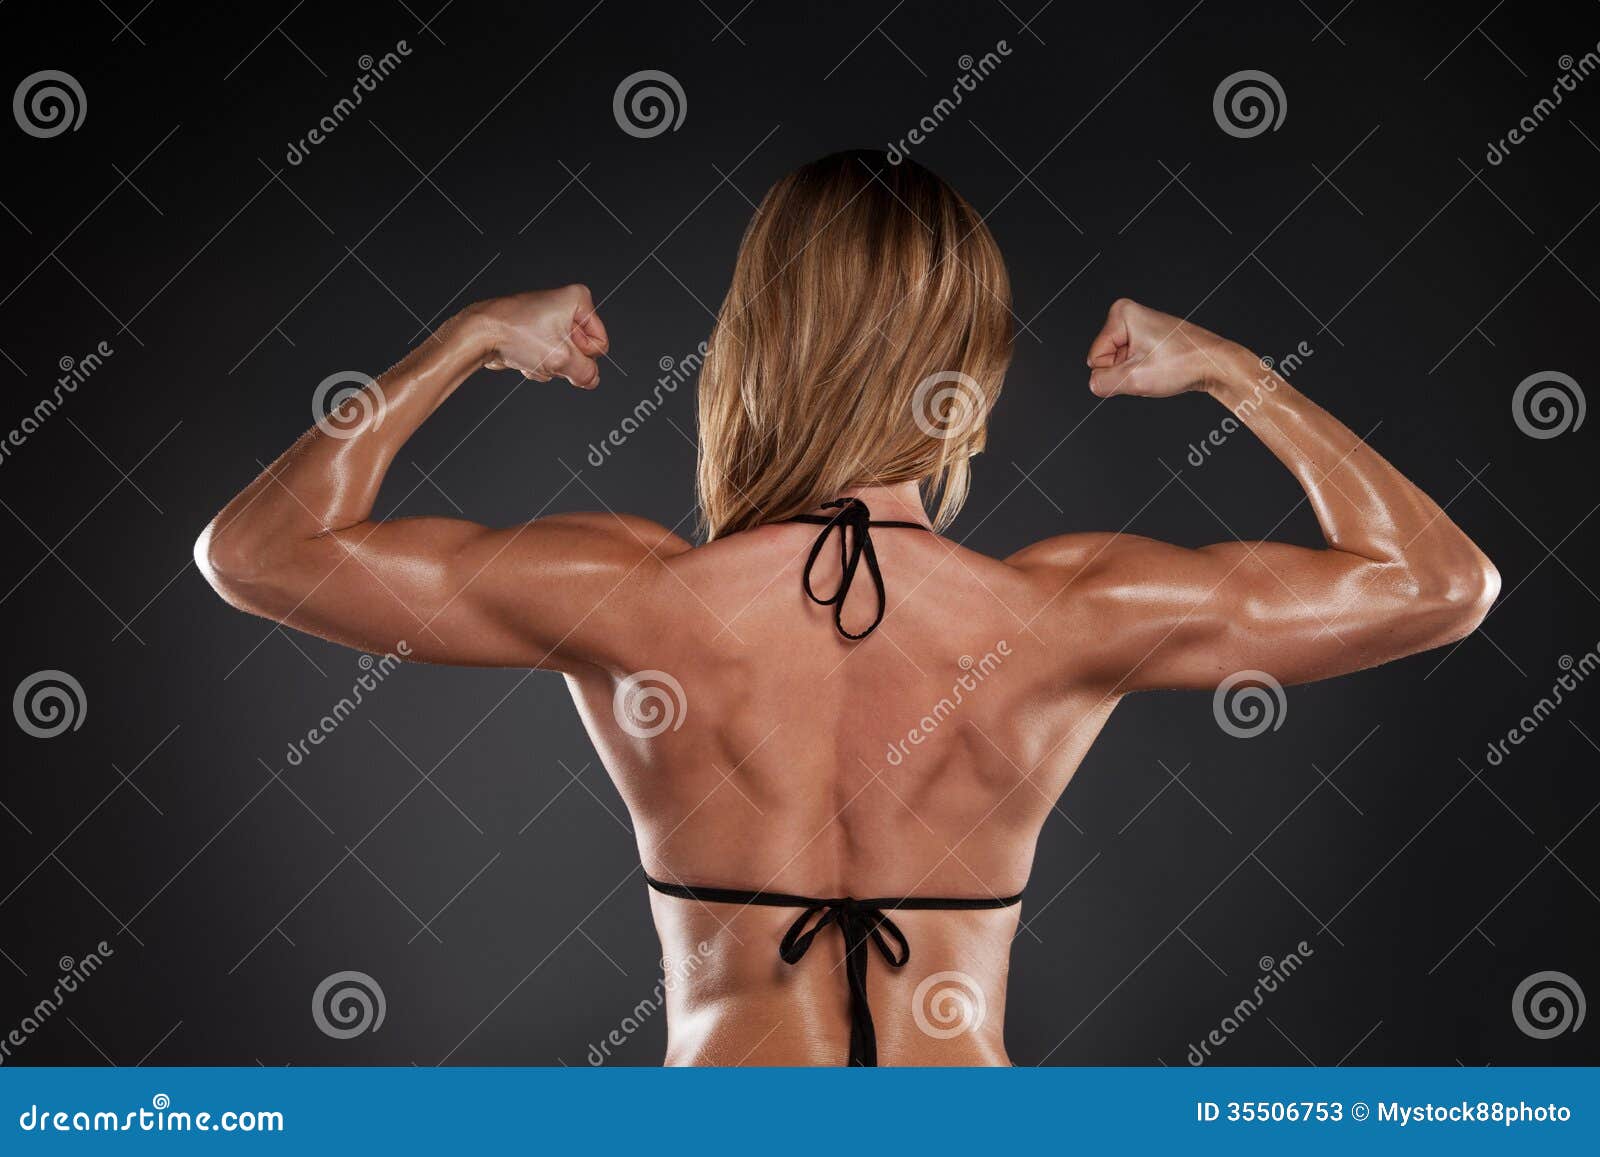 89,420 Back Muscles Woman Royalty-Free Images, Stock Photos & Pictures